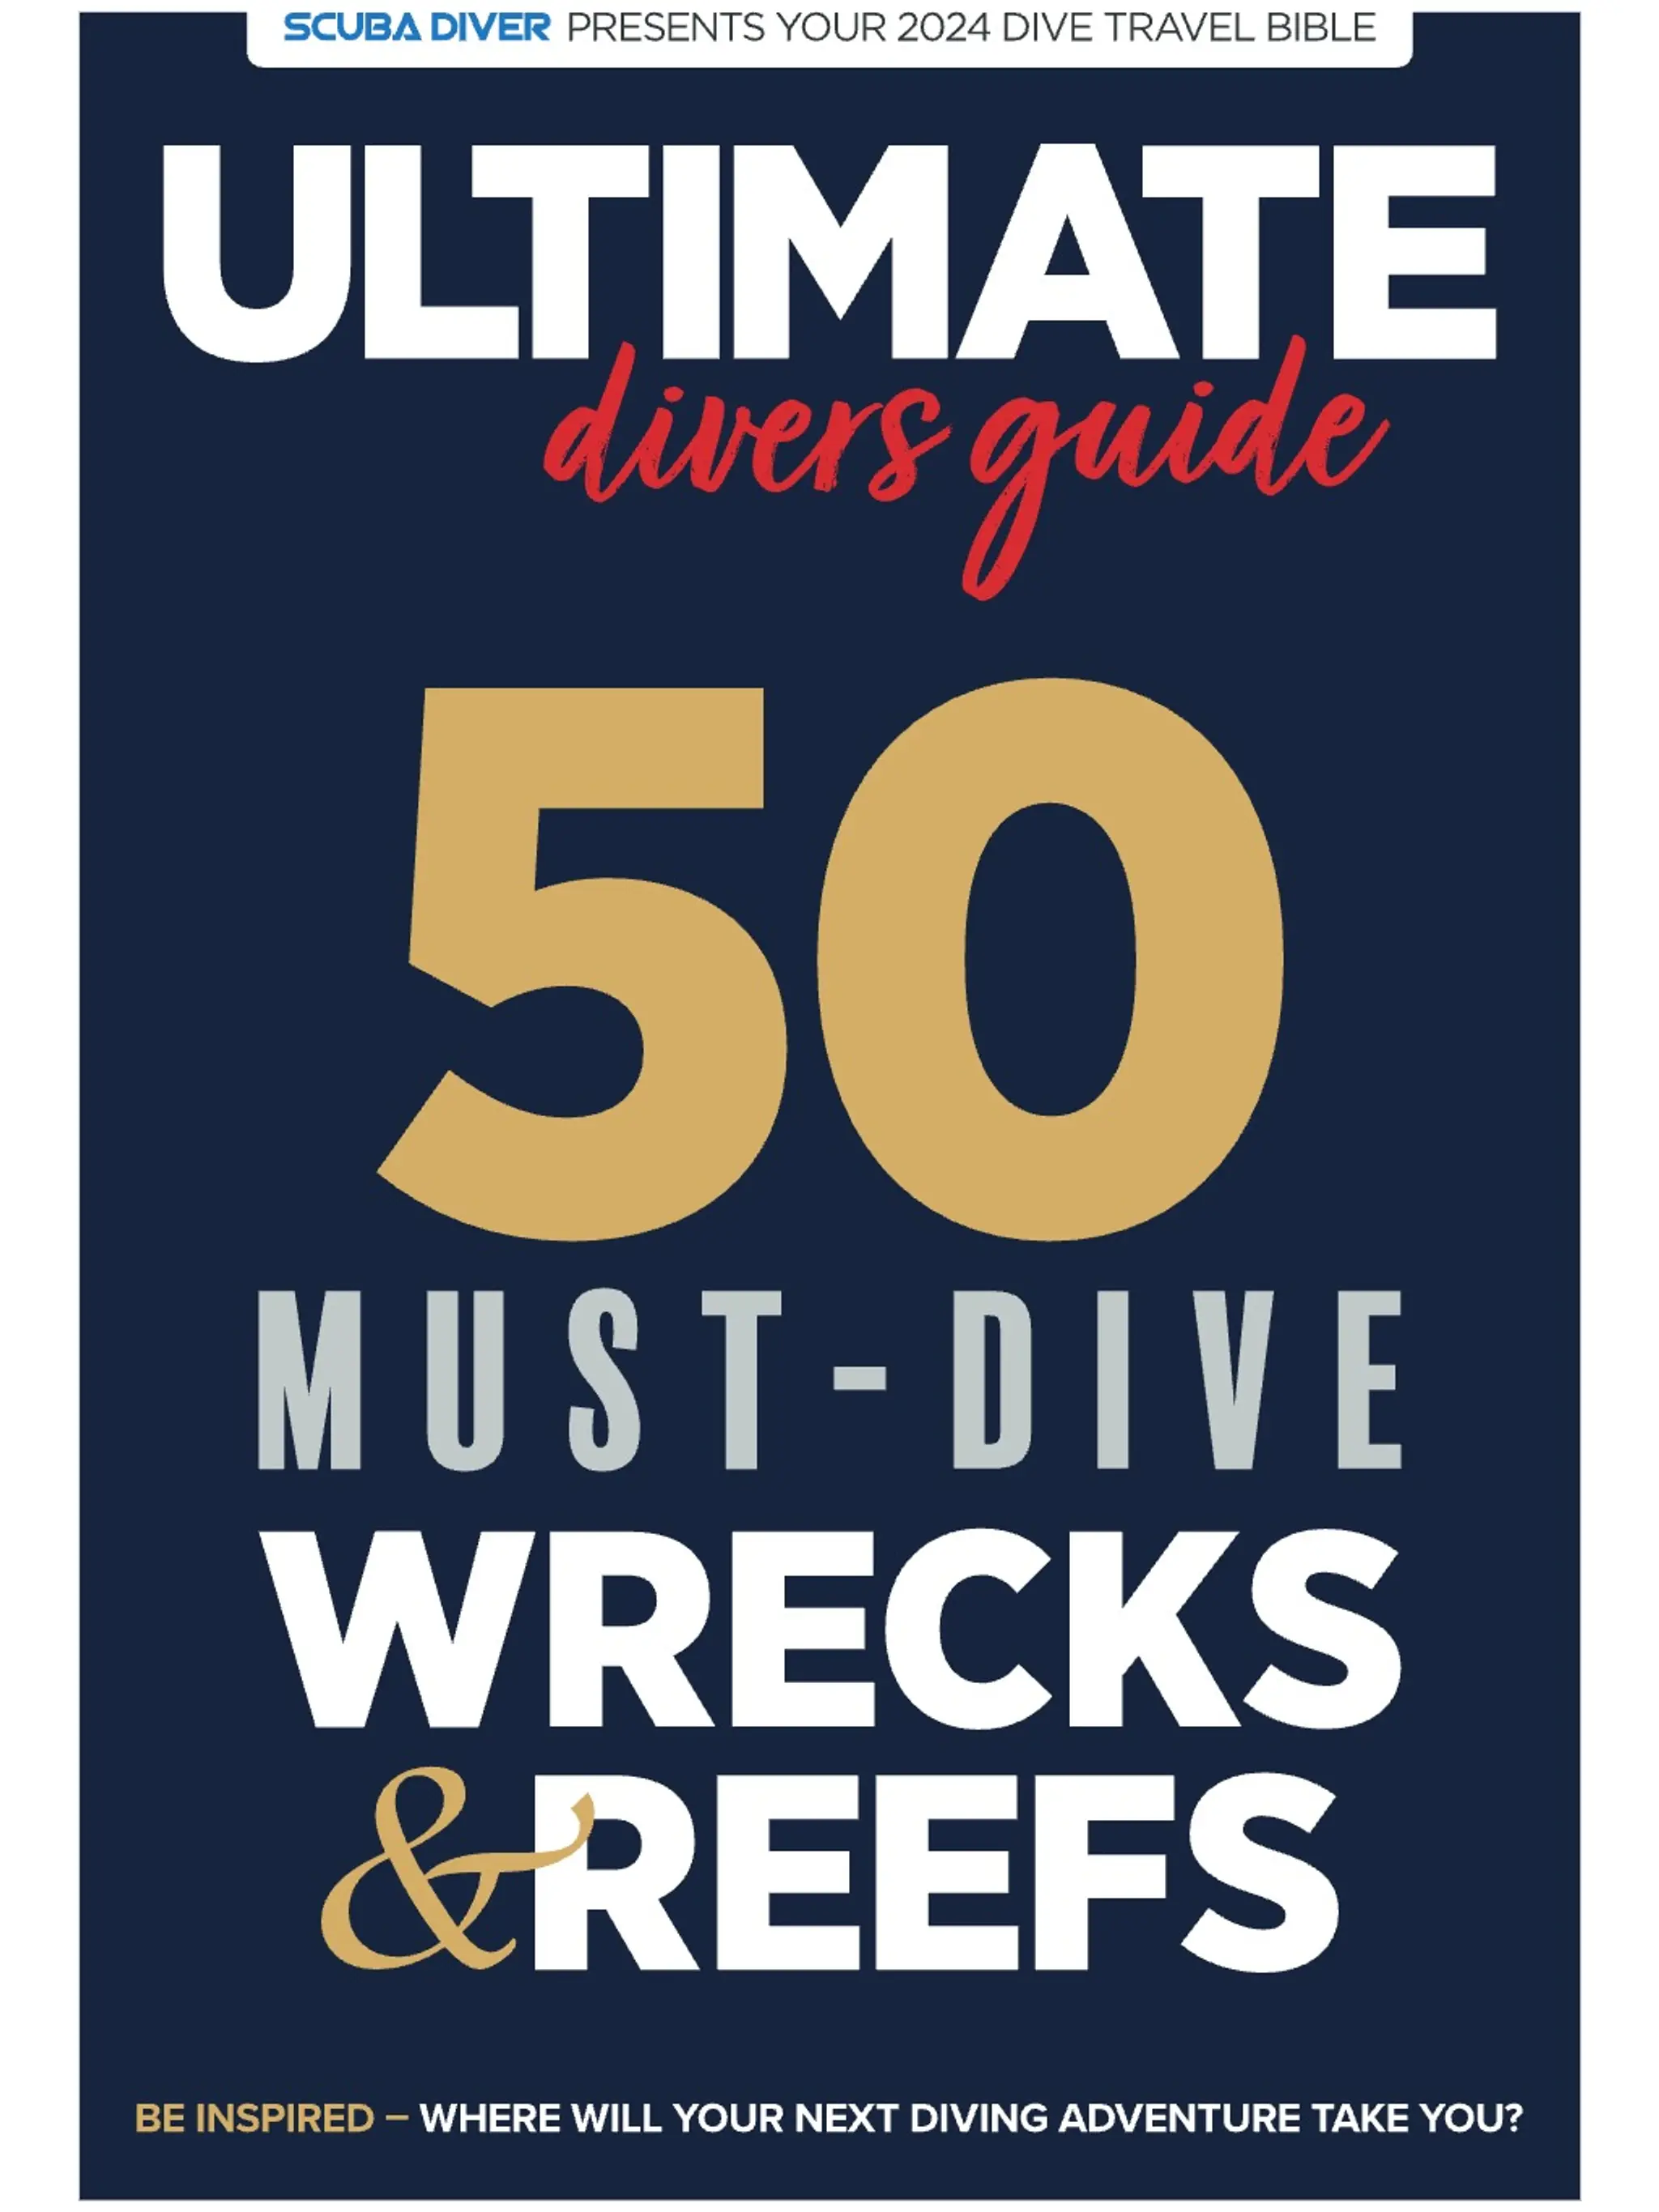 Ultimate Divers Guide 2024